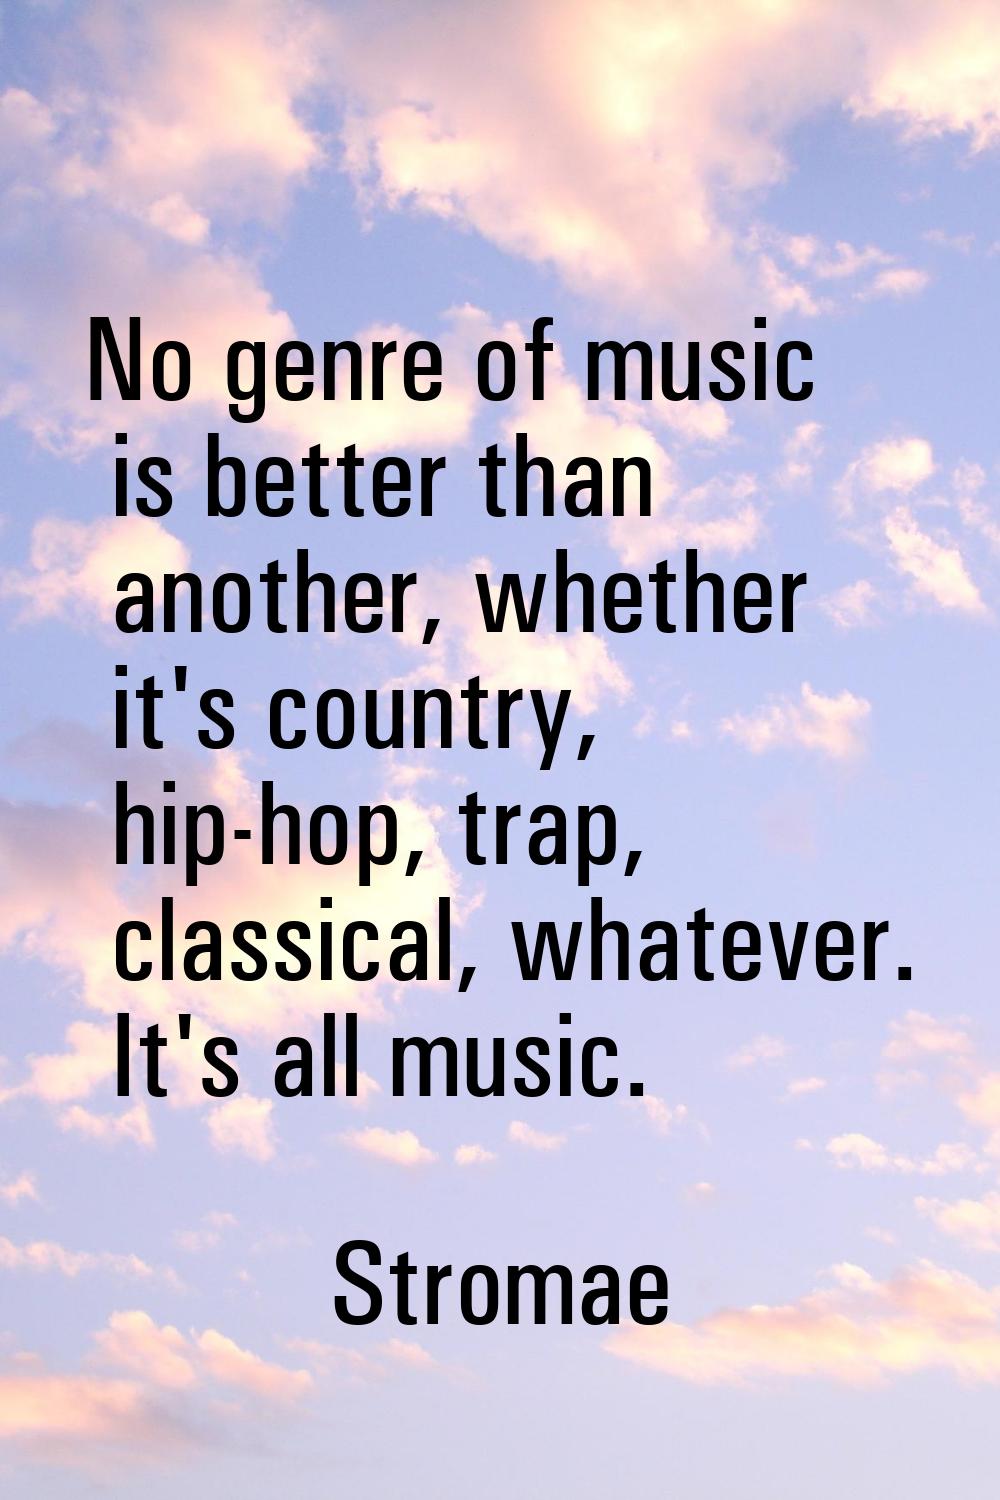 No genre of music is better than another, whether it's country, hip-hop, trap, classical, whatever.